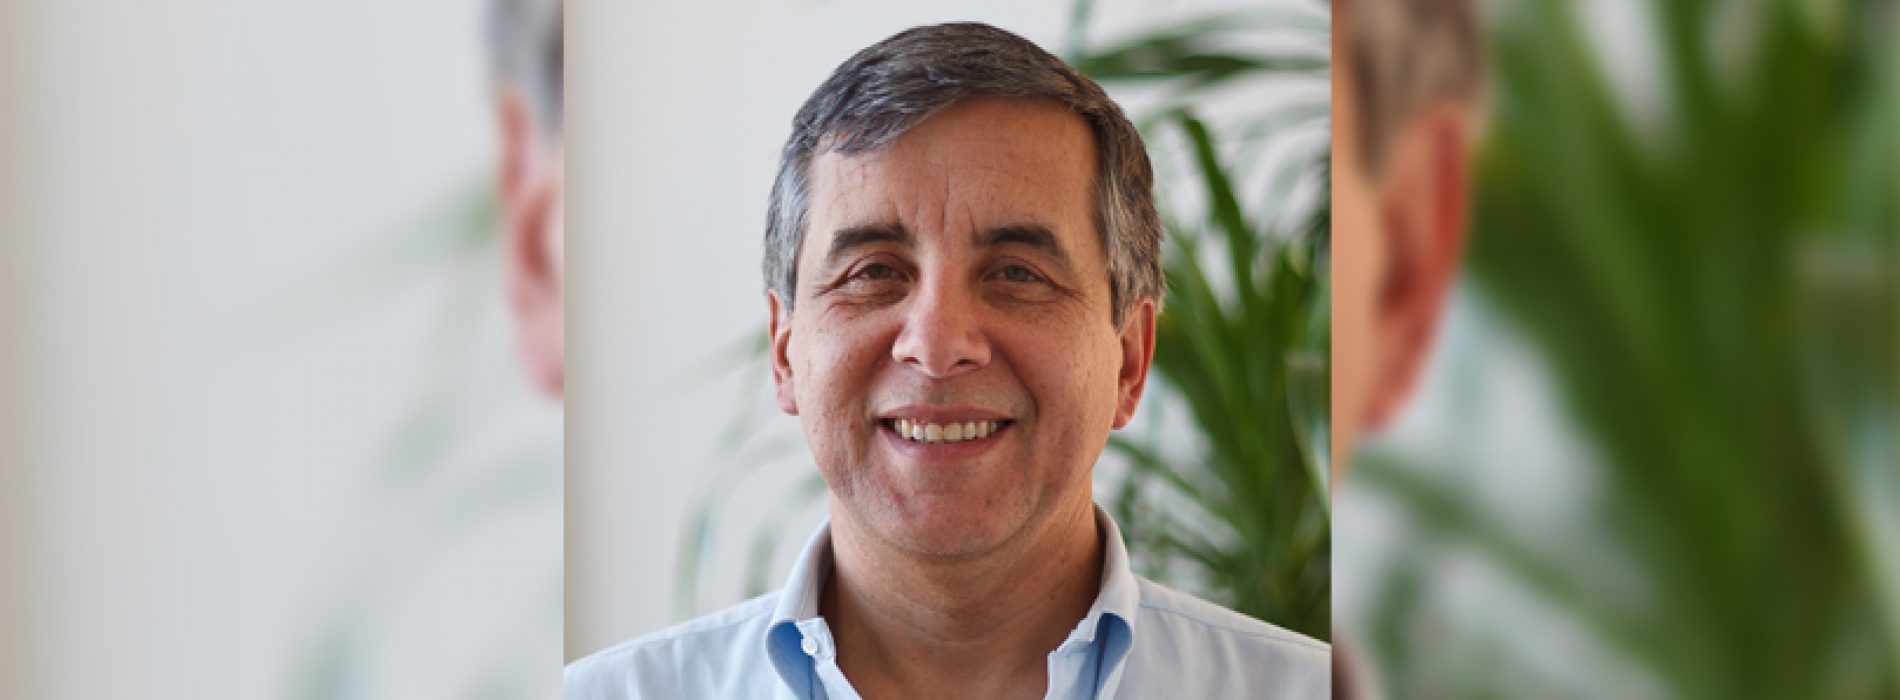 Dr. Sergio Lavandero, Coordinator of session and speaker confirmed for annual meeting of the society for Biochemistry and Molecular Biology of Chile